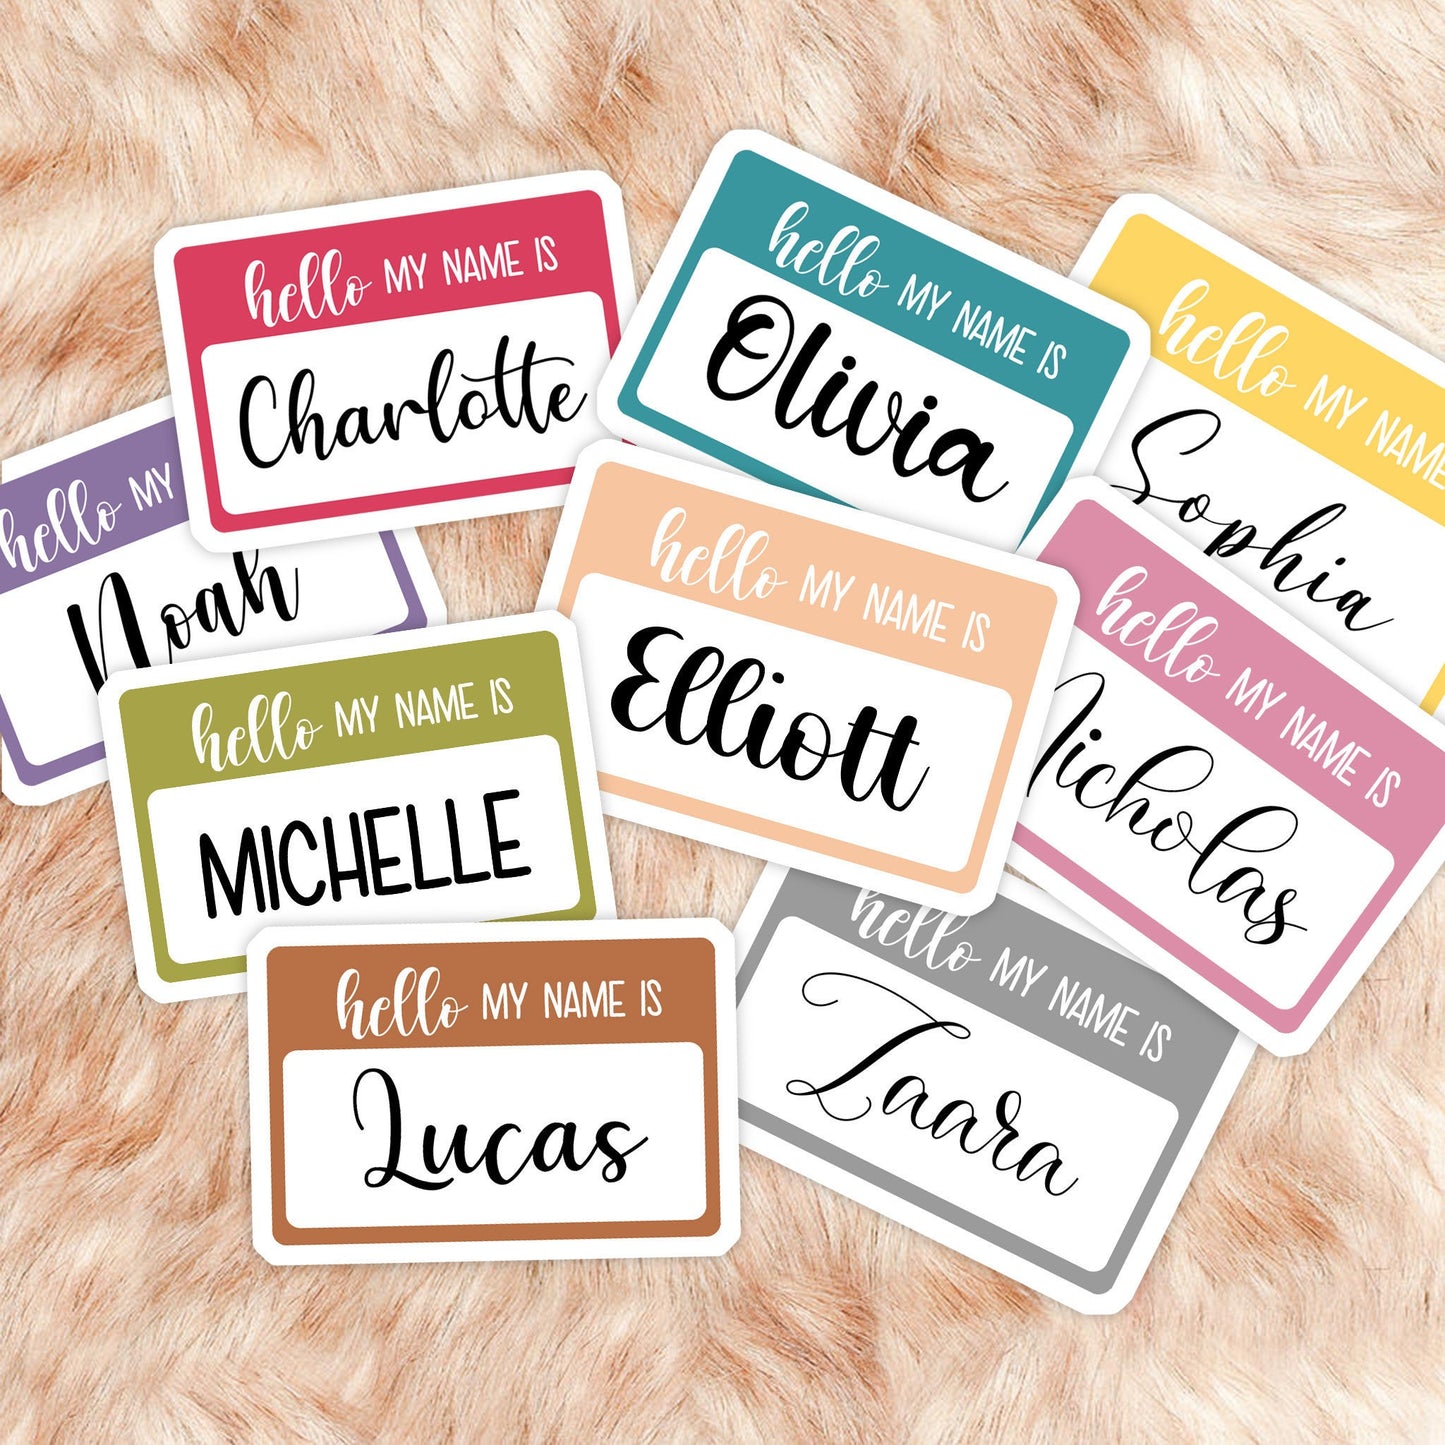 Hello, My Name Is sticker, custom Name Tag, Personalized Name Sticker, Friends decal, Graduation Stickers, Custom Stickers, Name Decal